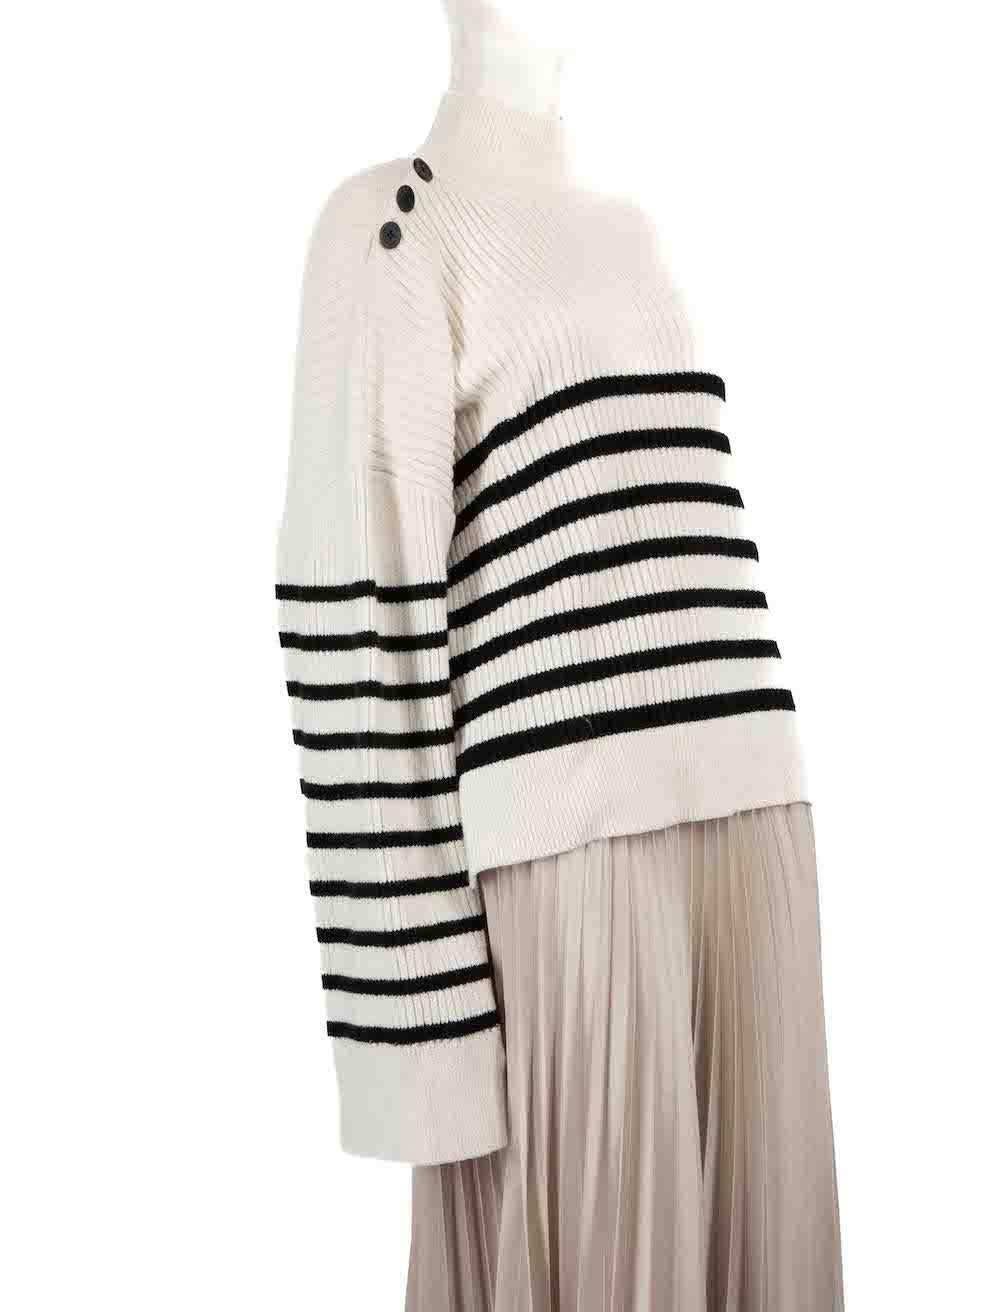 CONDITION is Very good. Minimal wear to jumper is evident. Minimal wear to the centre-front with a pluck to the knit on this used Self-Portrait designer resale item.
 
 
 
 Details
 
 
 White
 
 Cotton
 
 Knit jumper
 
 Mariner stripe pattern
 
